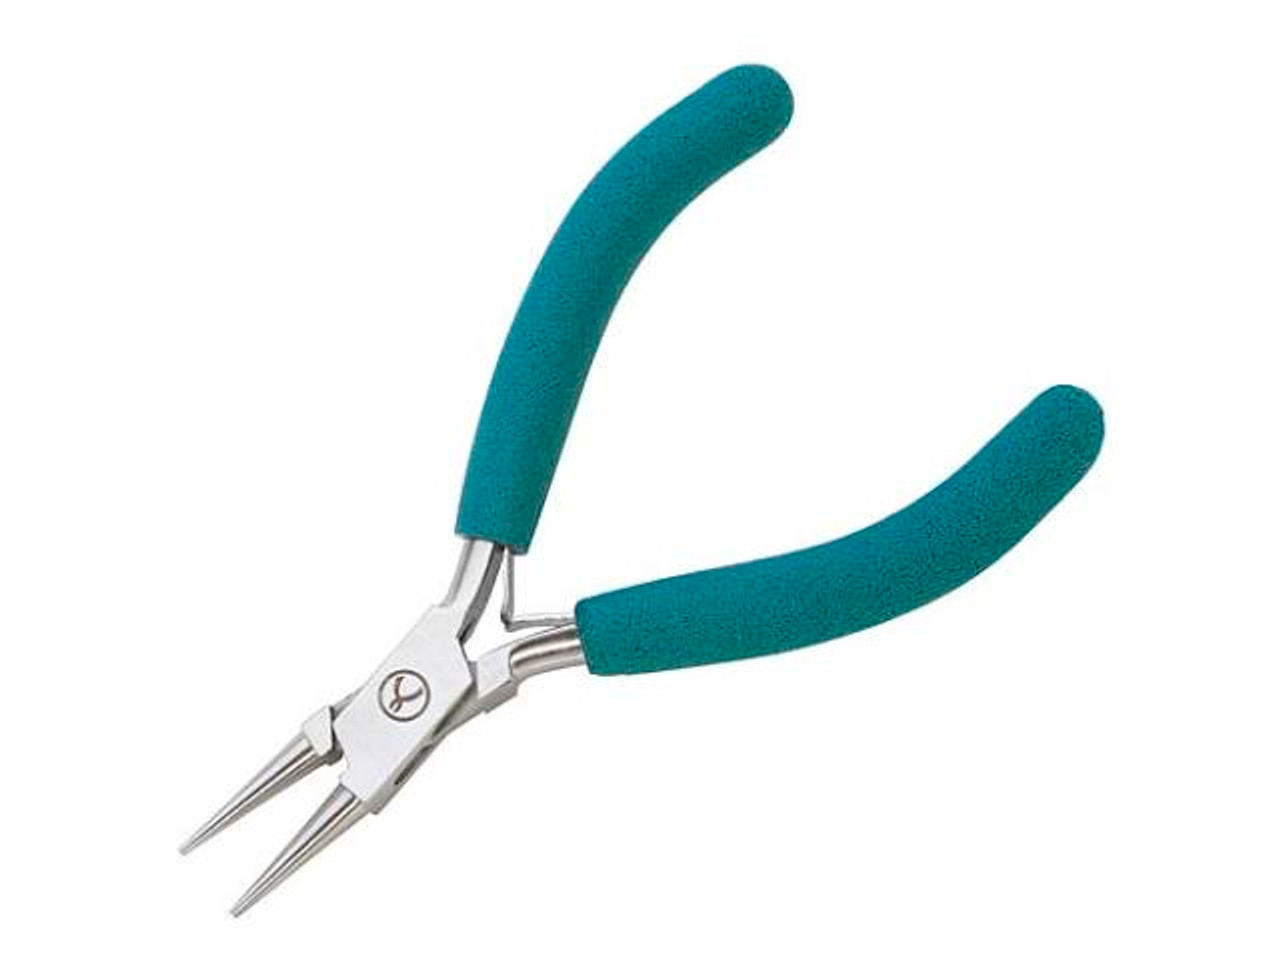 69-275-52 Baby Wubbers Round-Nose Jewelry Making Pliers - Rings